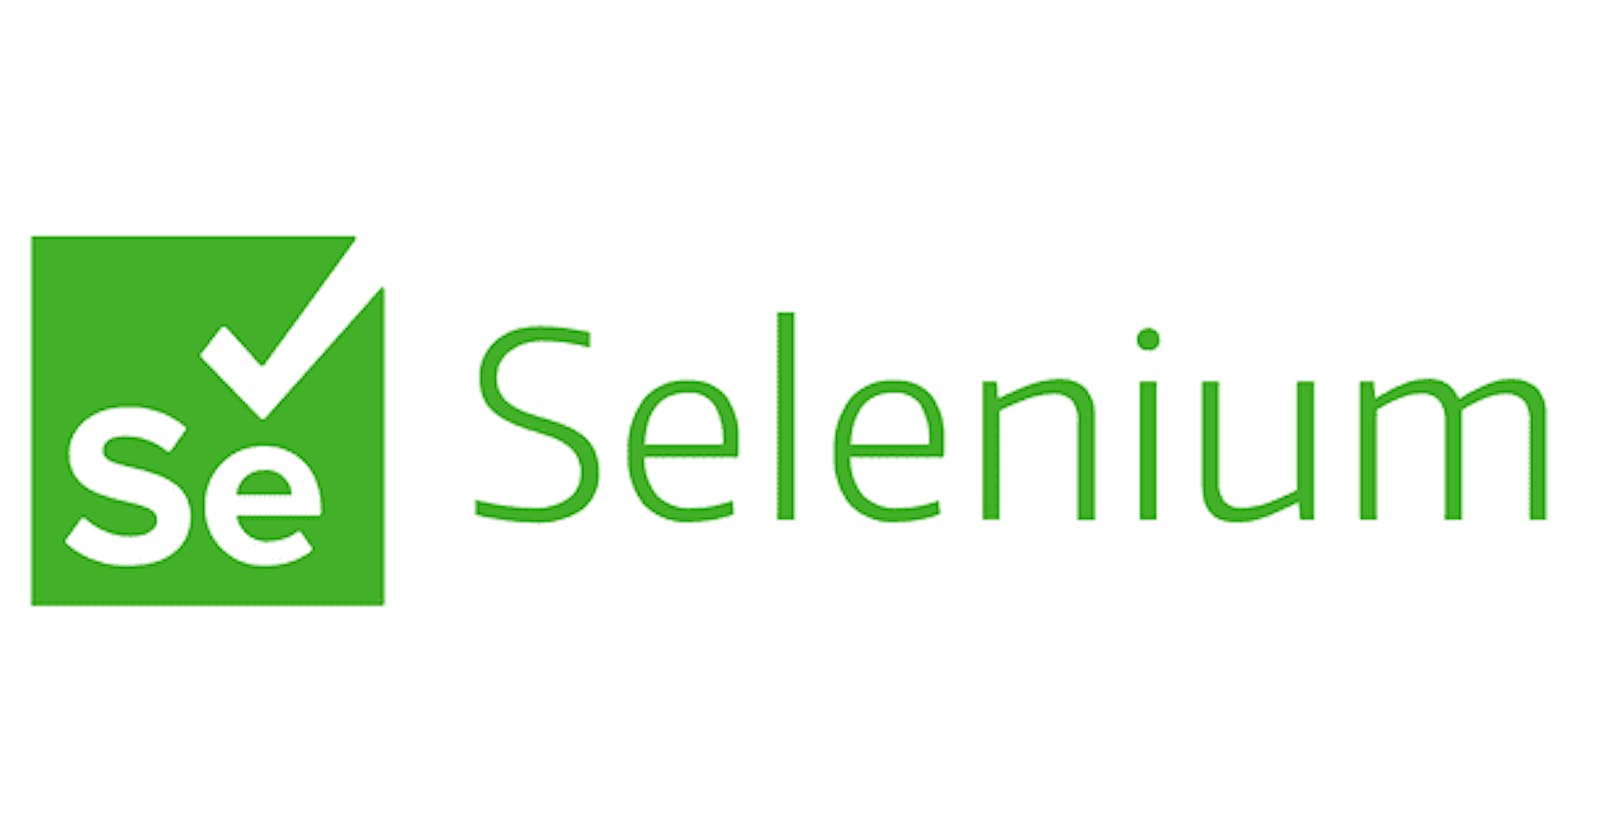 Automating Google Search with Selenium and Python